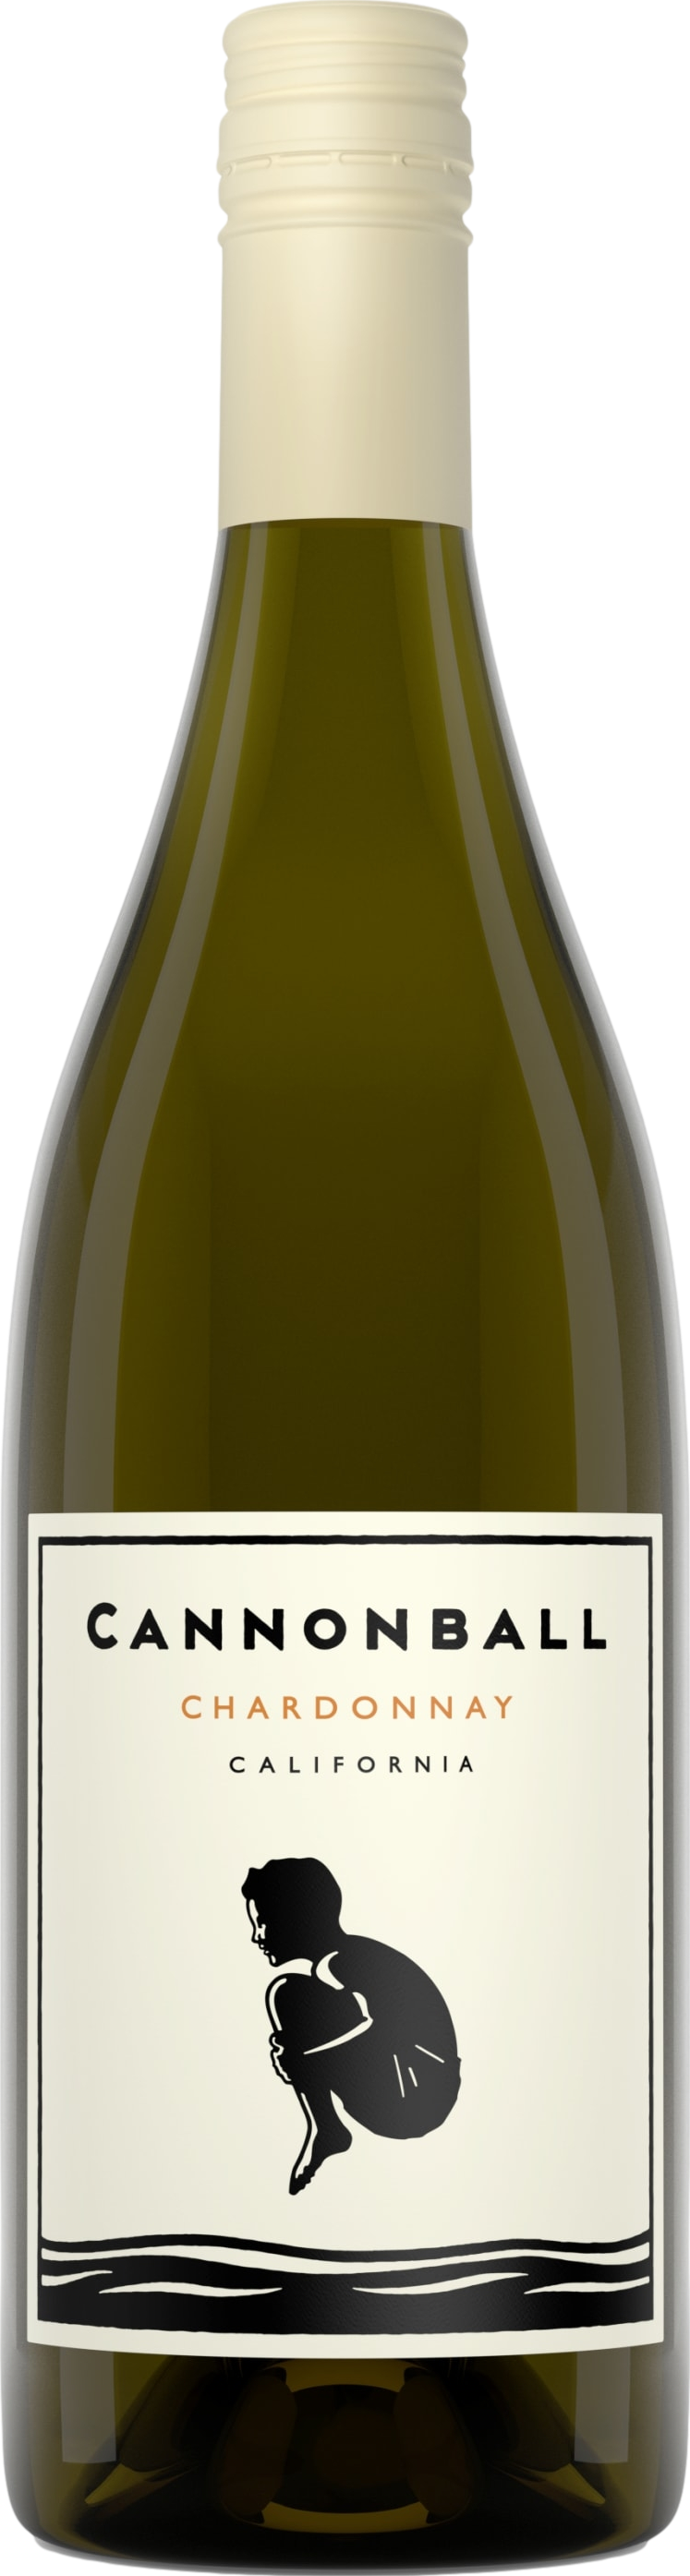 Cannonball Chardonnay 2020 Cannonball 8wines DACH